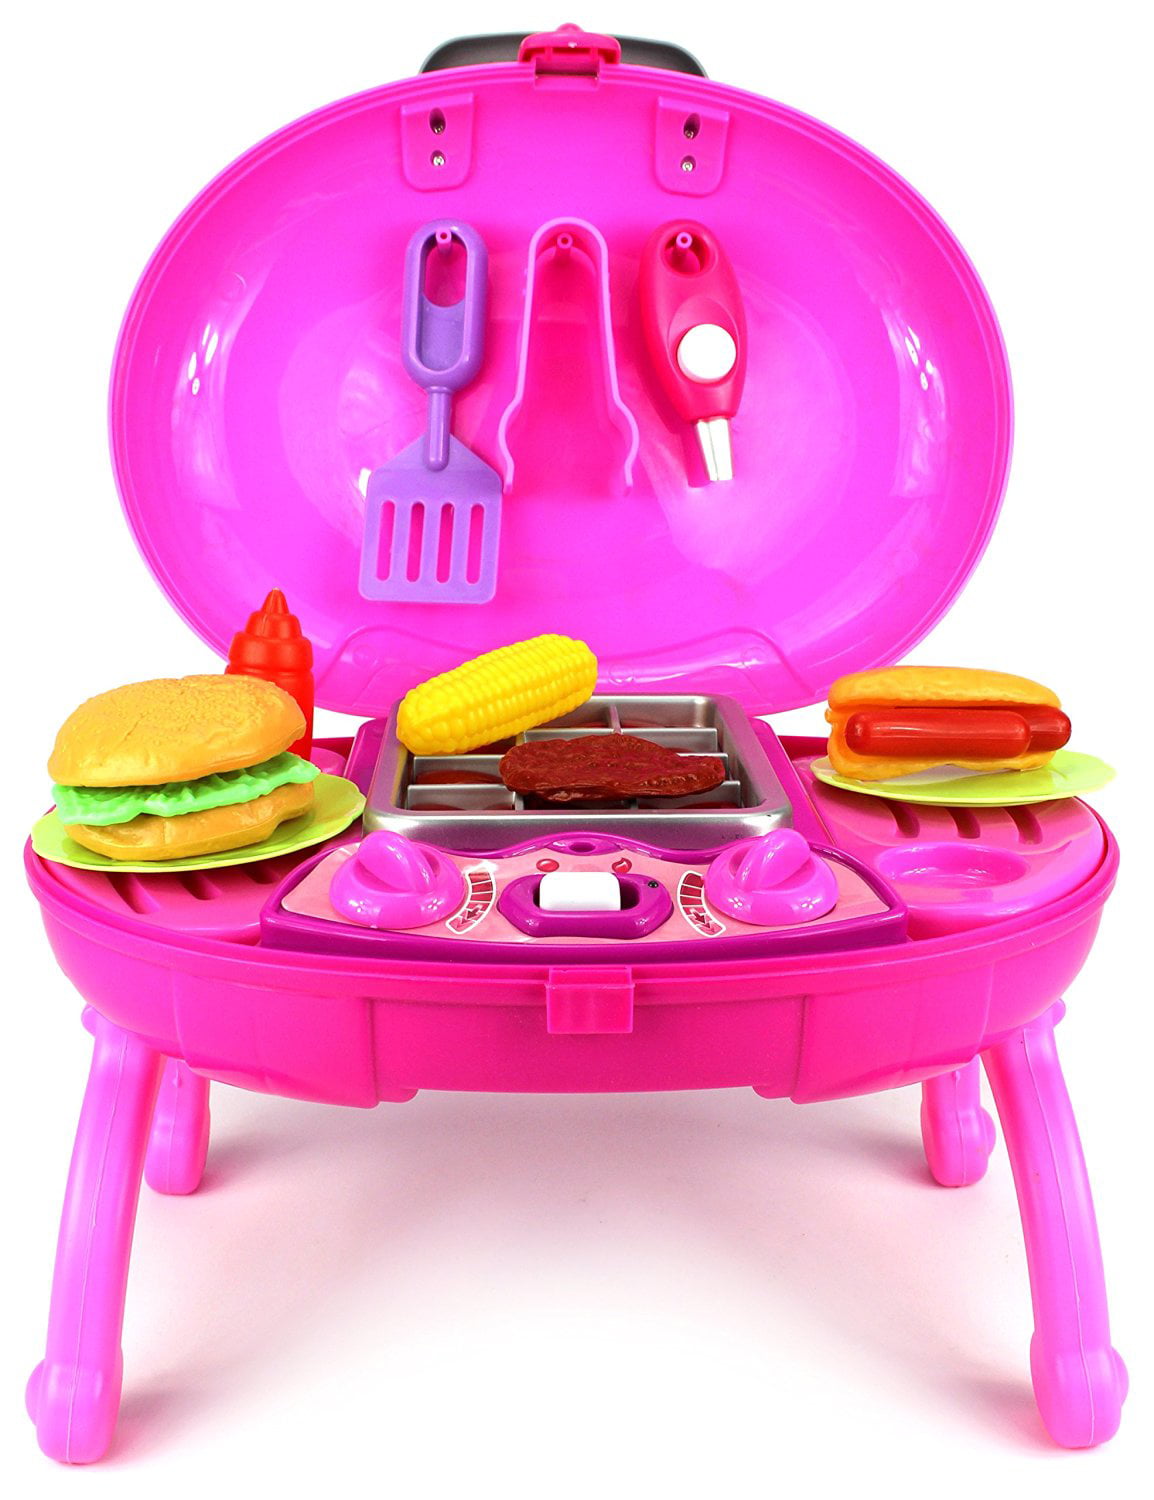 Velocity Toys Barbecue BBQ Grill Children's Kid's Pretend Play Toy Kitchen & Food Play Set w/ Lights, Sounds Walmart.com